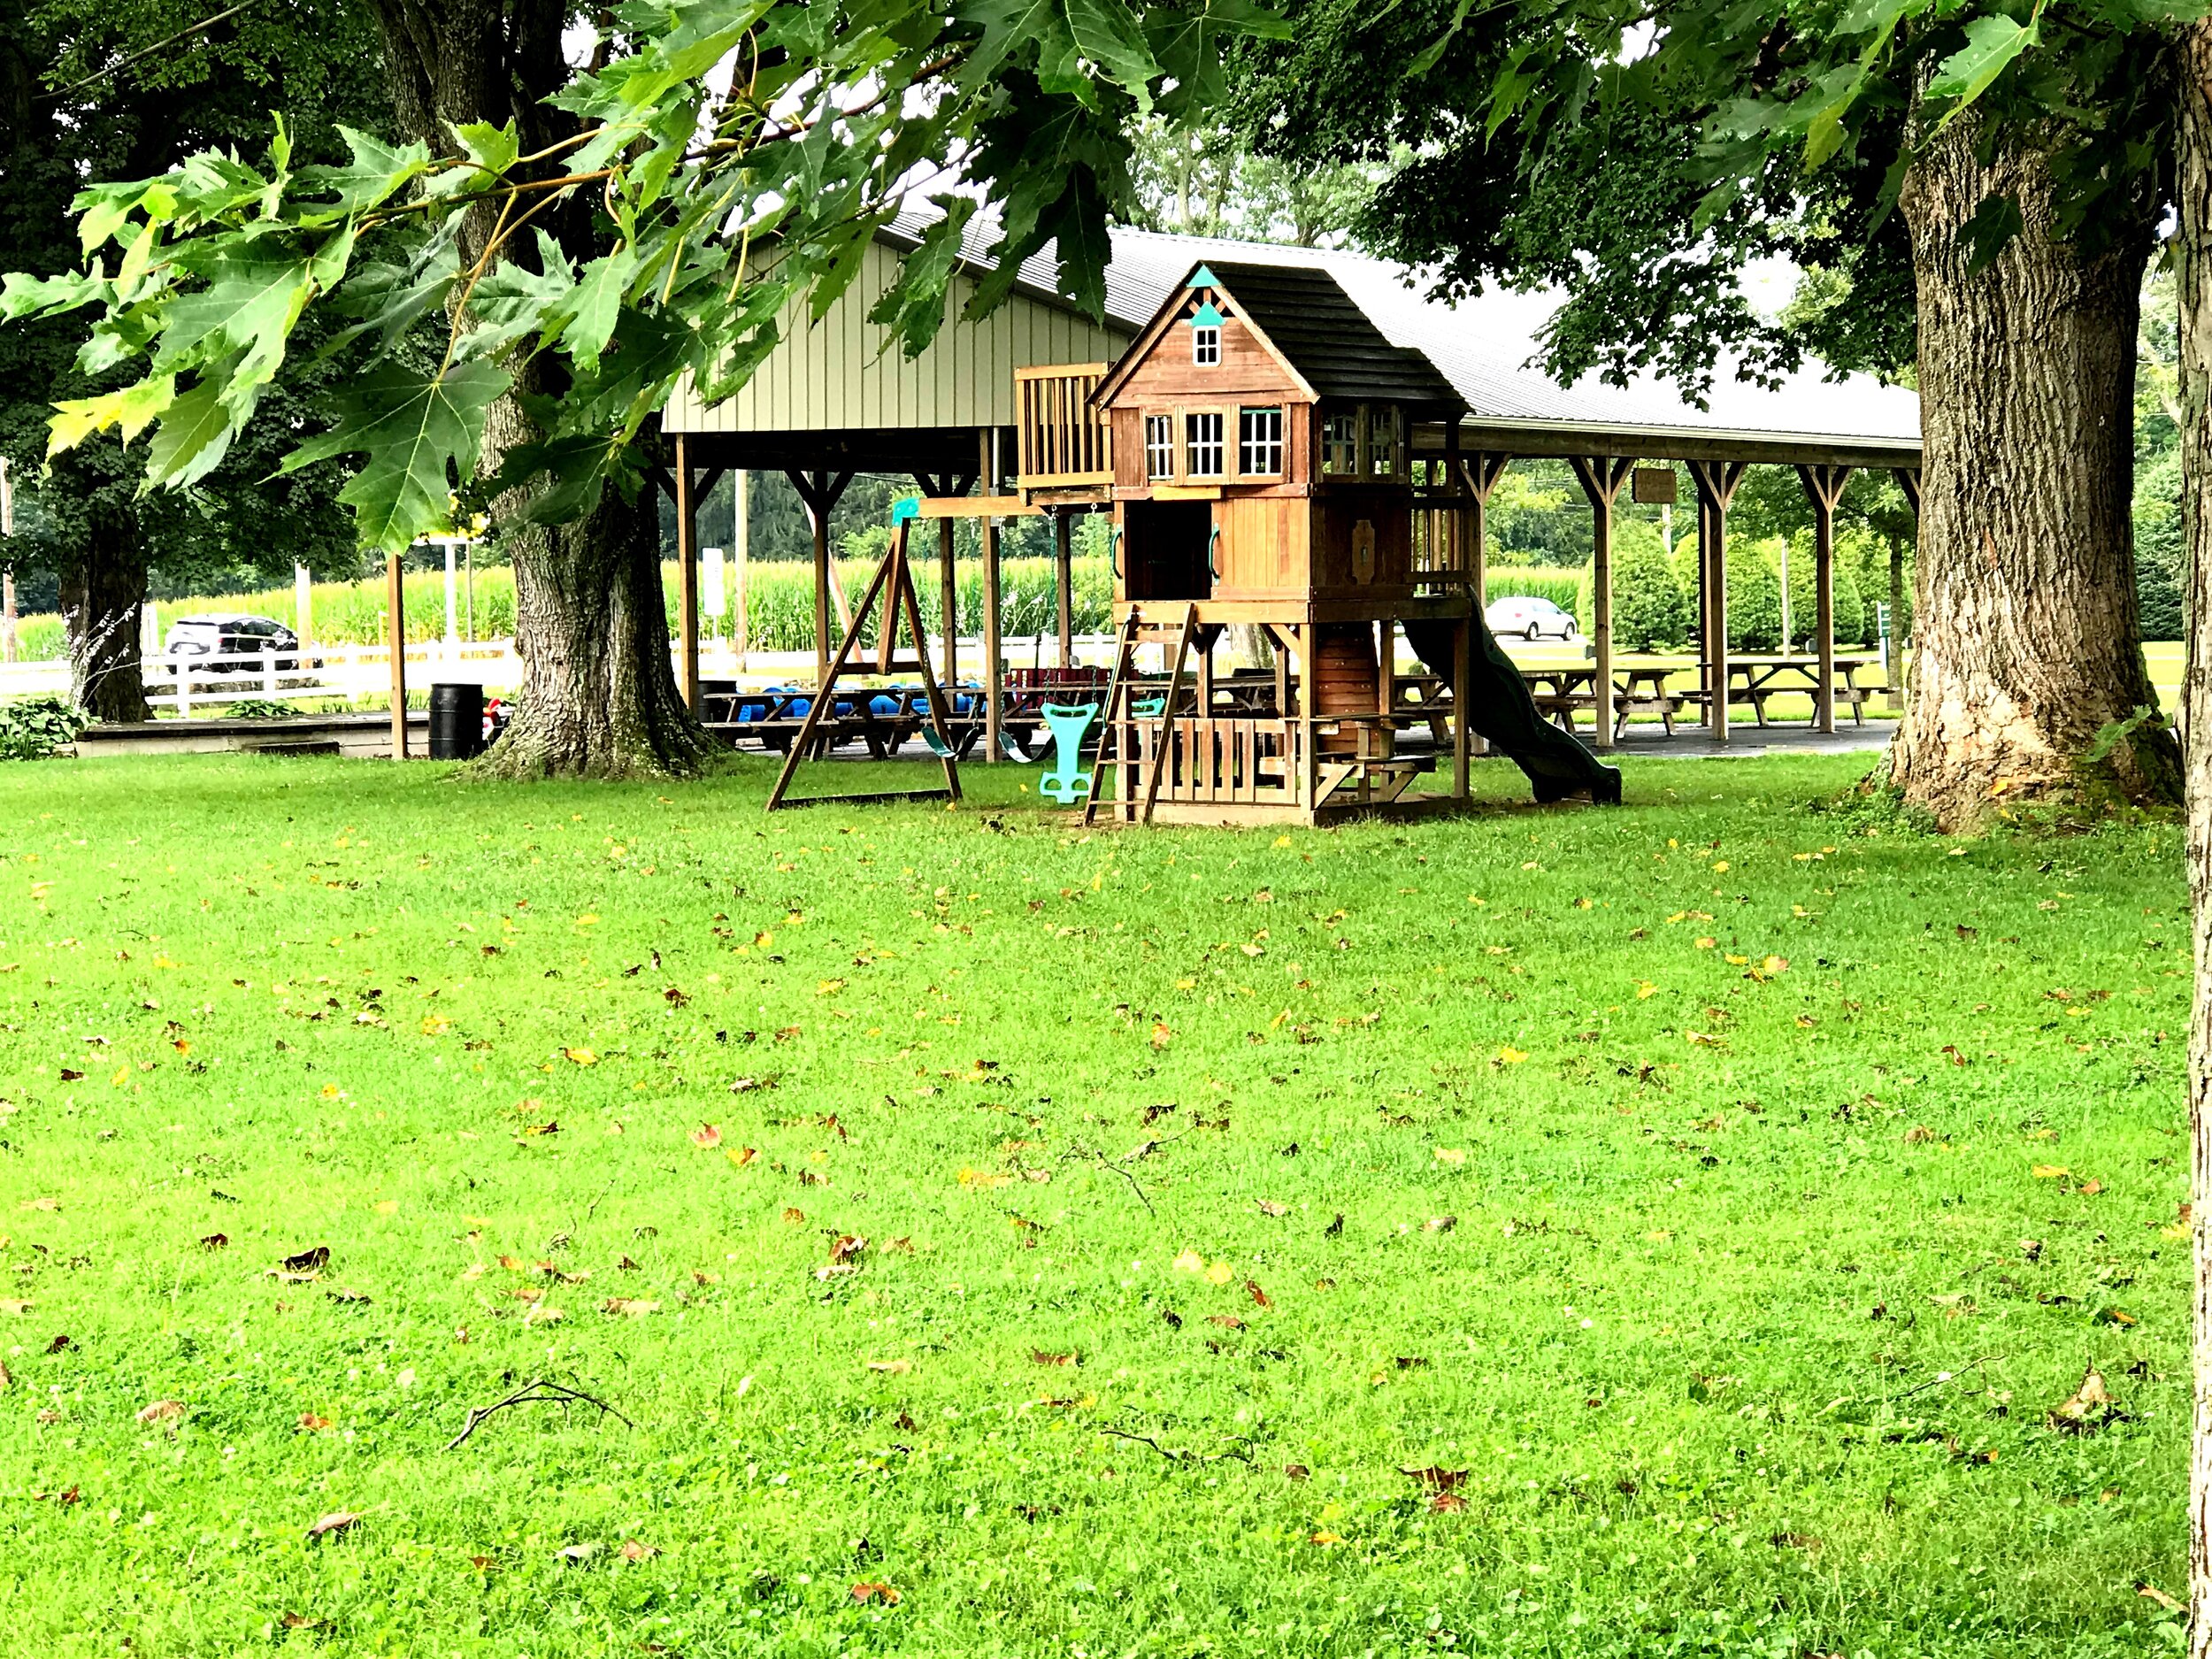  The Warsaw Retreat Center features several playground areas for children of ages 